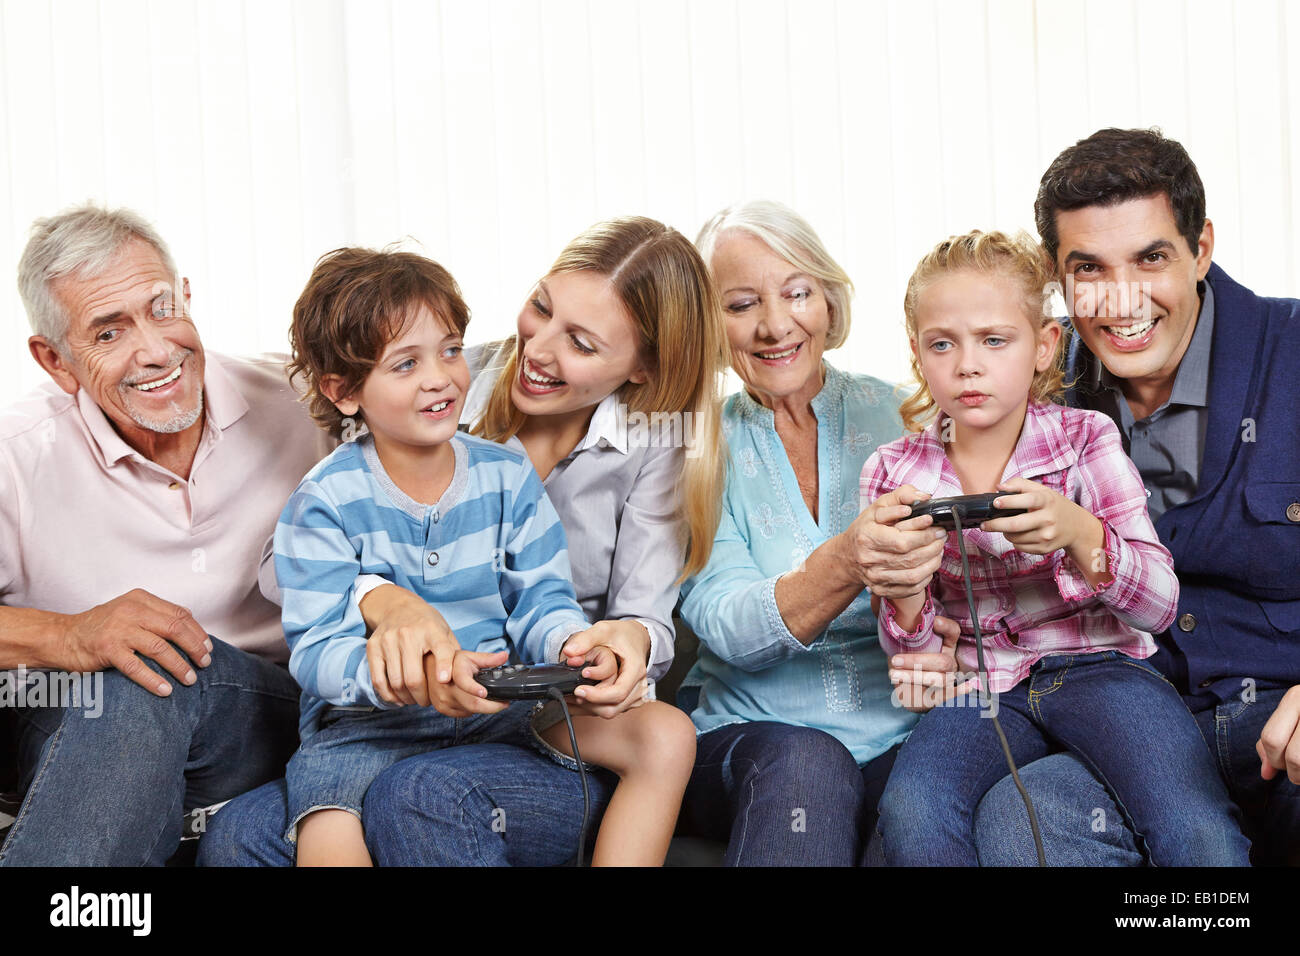 Happy family with controller playing video games on Smart TV in living room Stock Photo